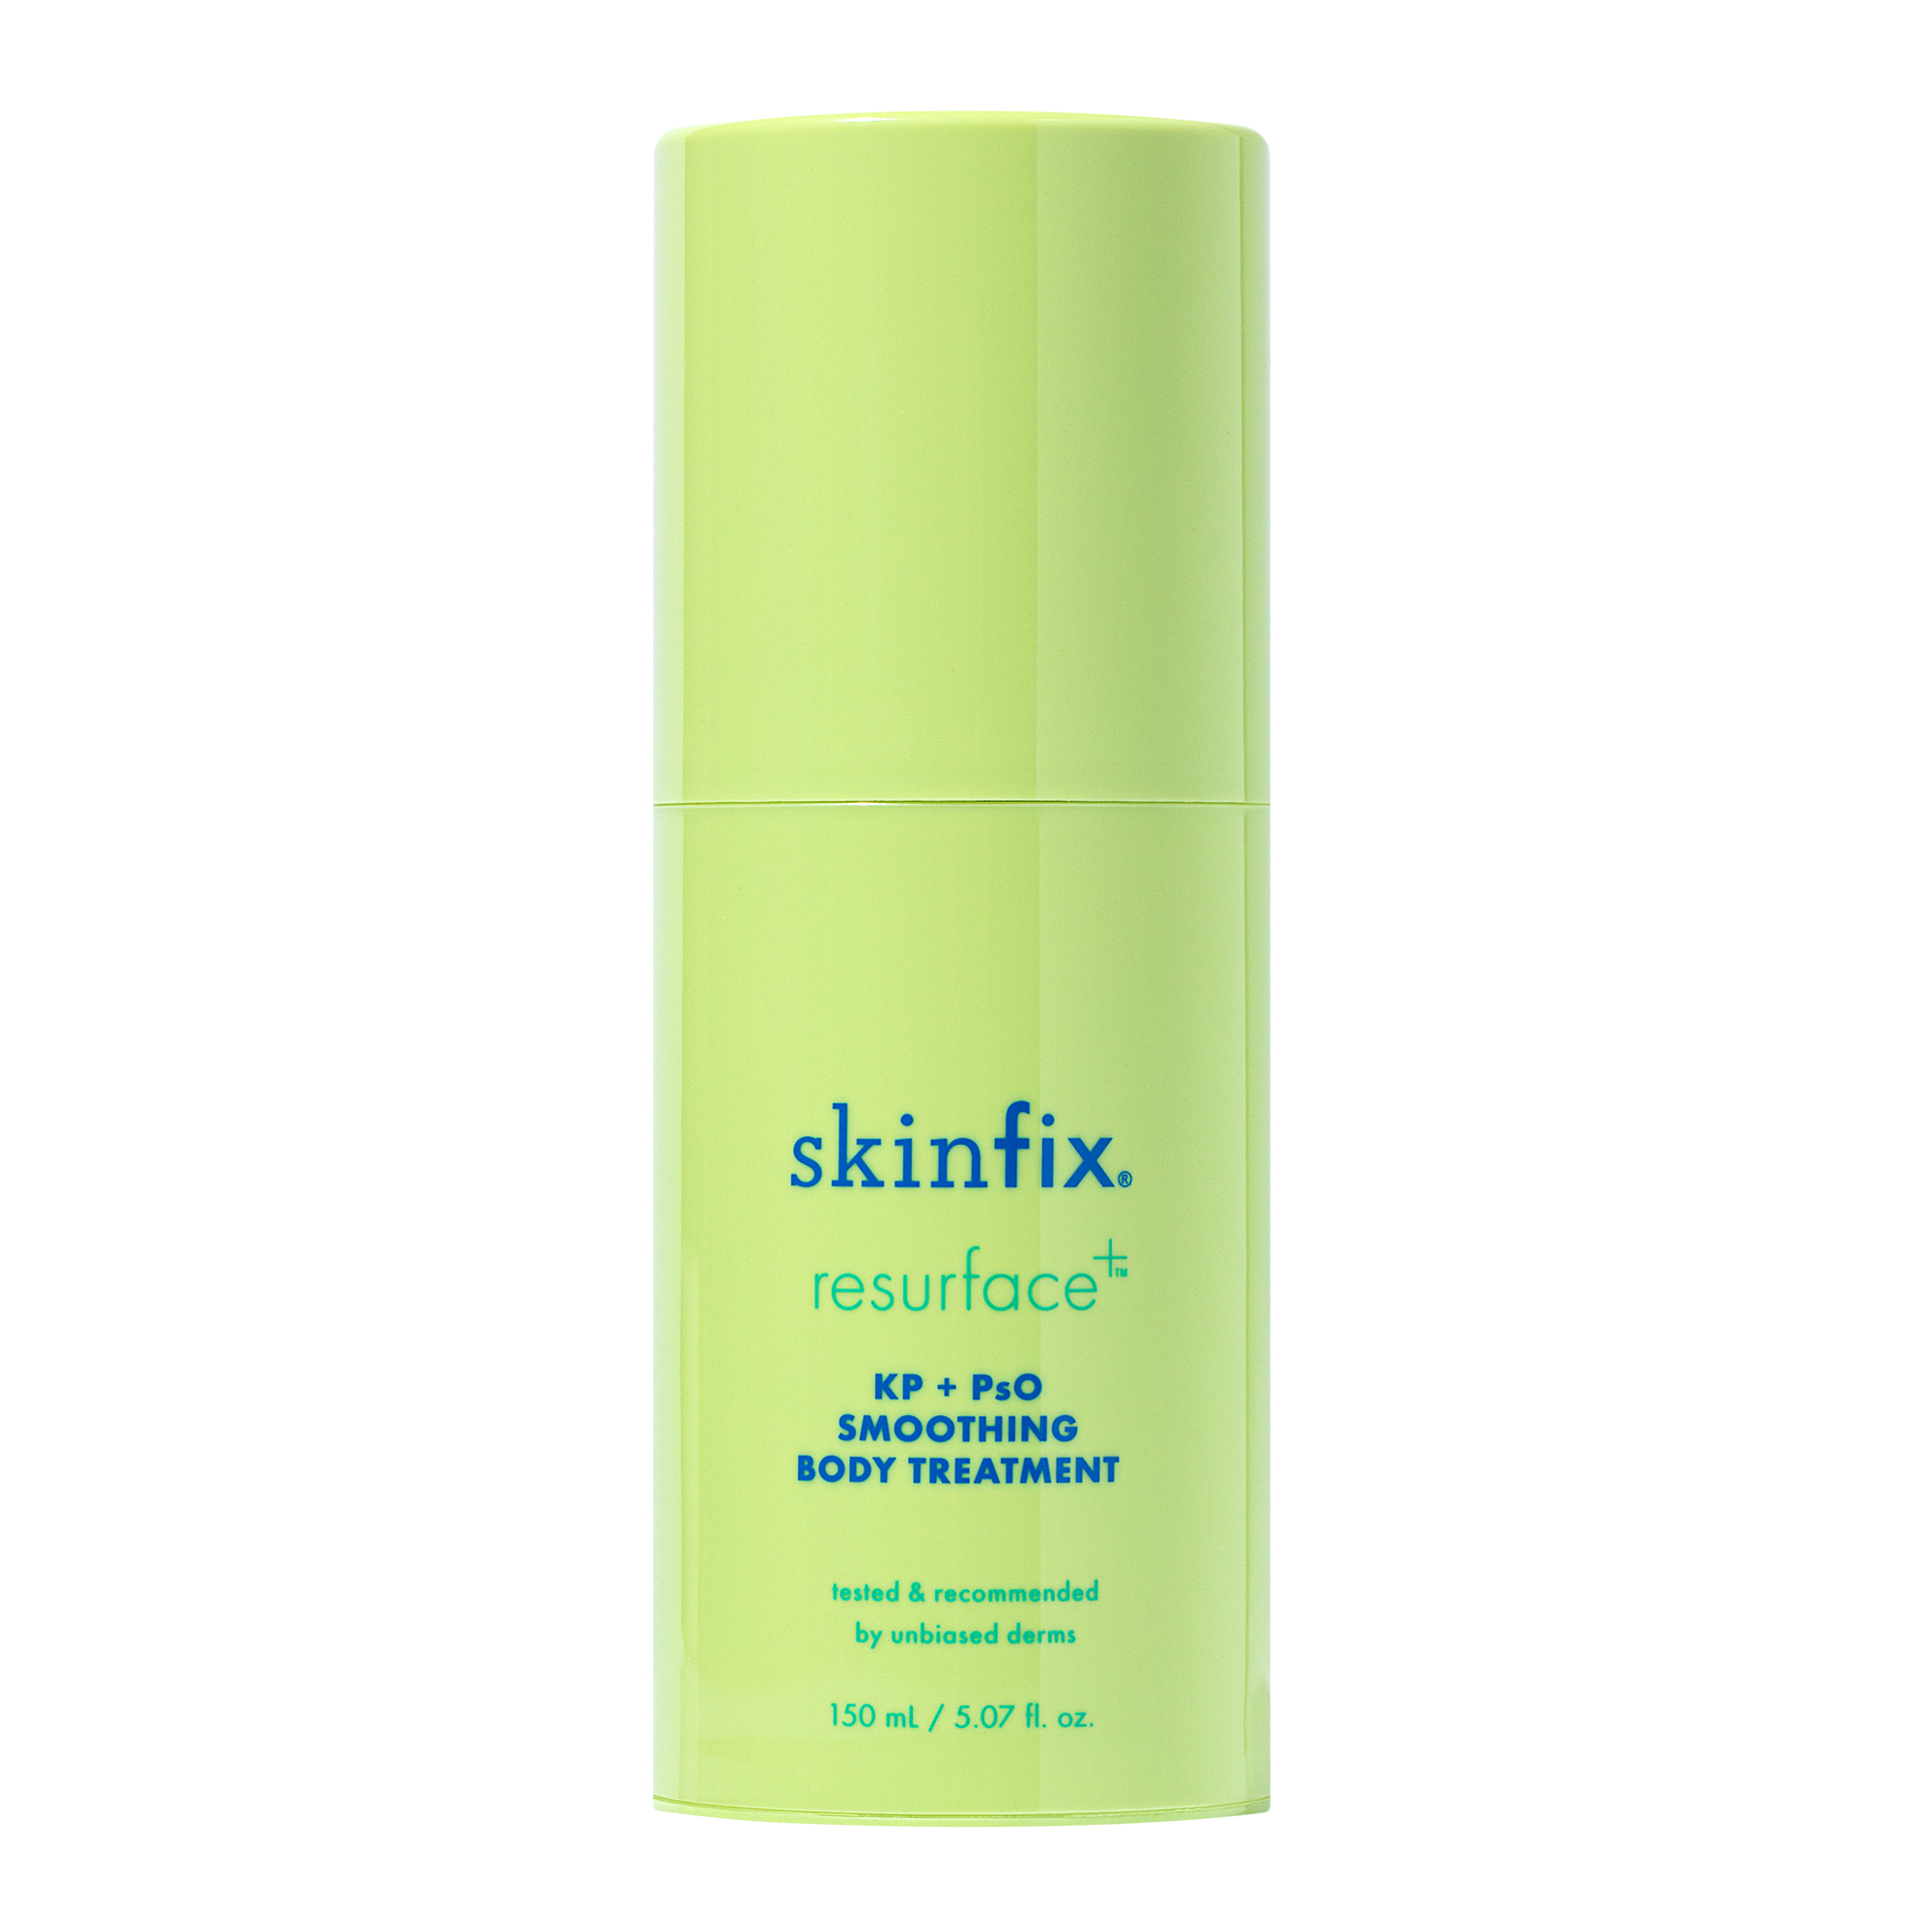 Skinfix KP + PsO Smoothing Body Treatment